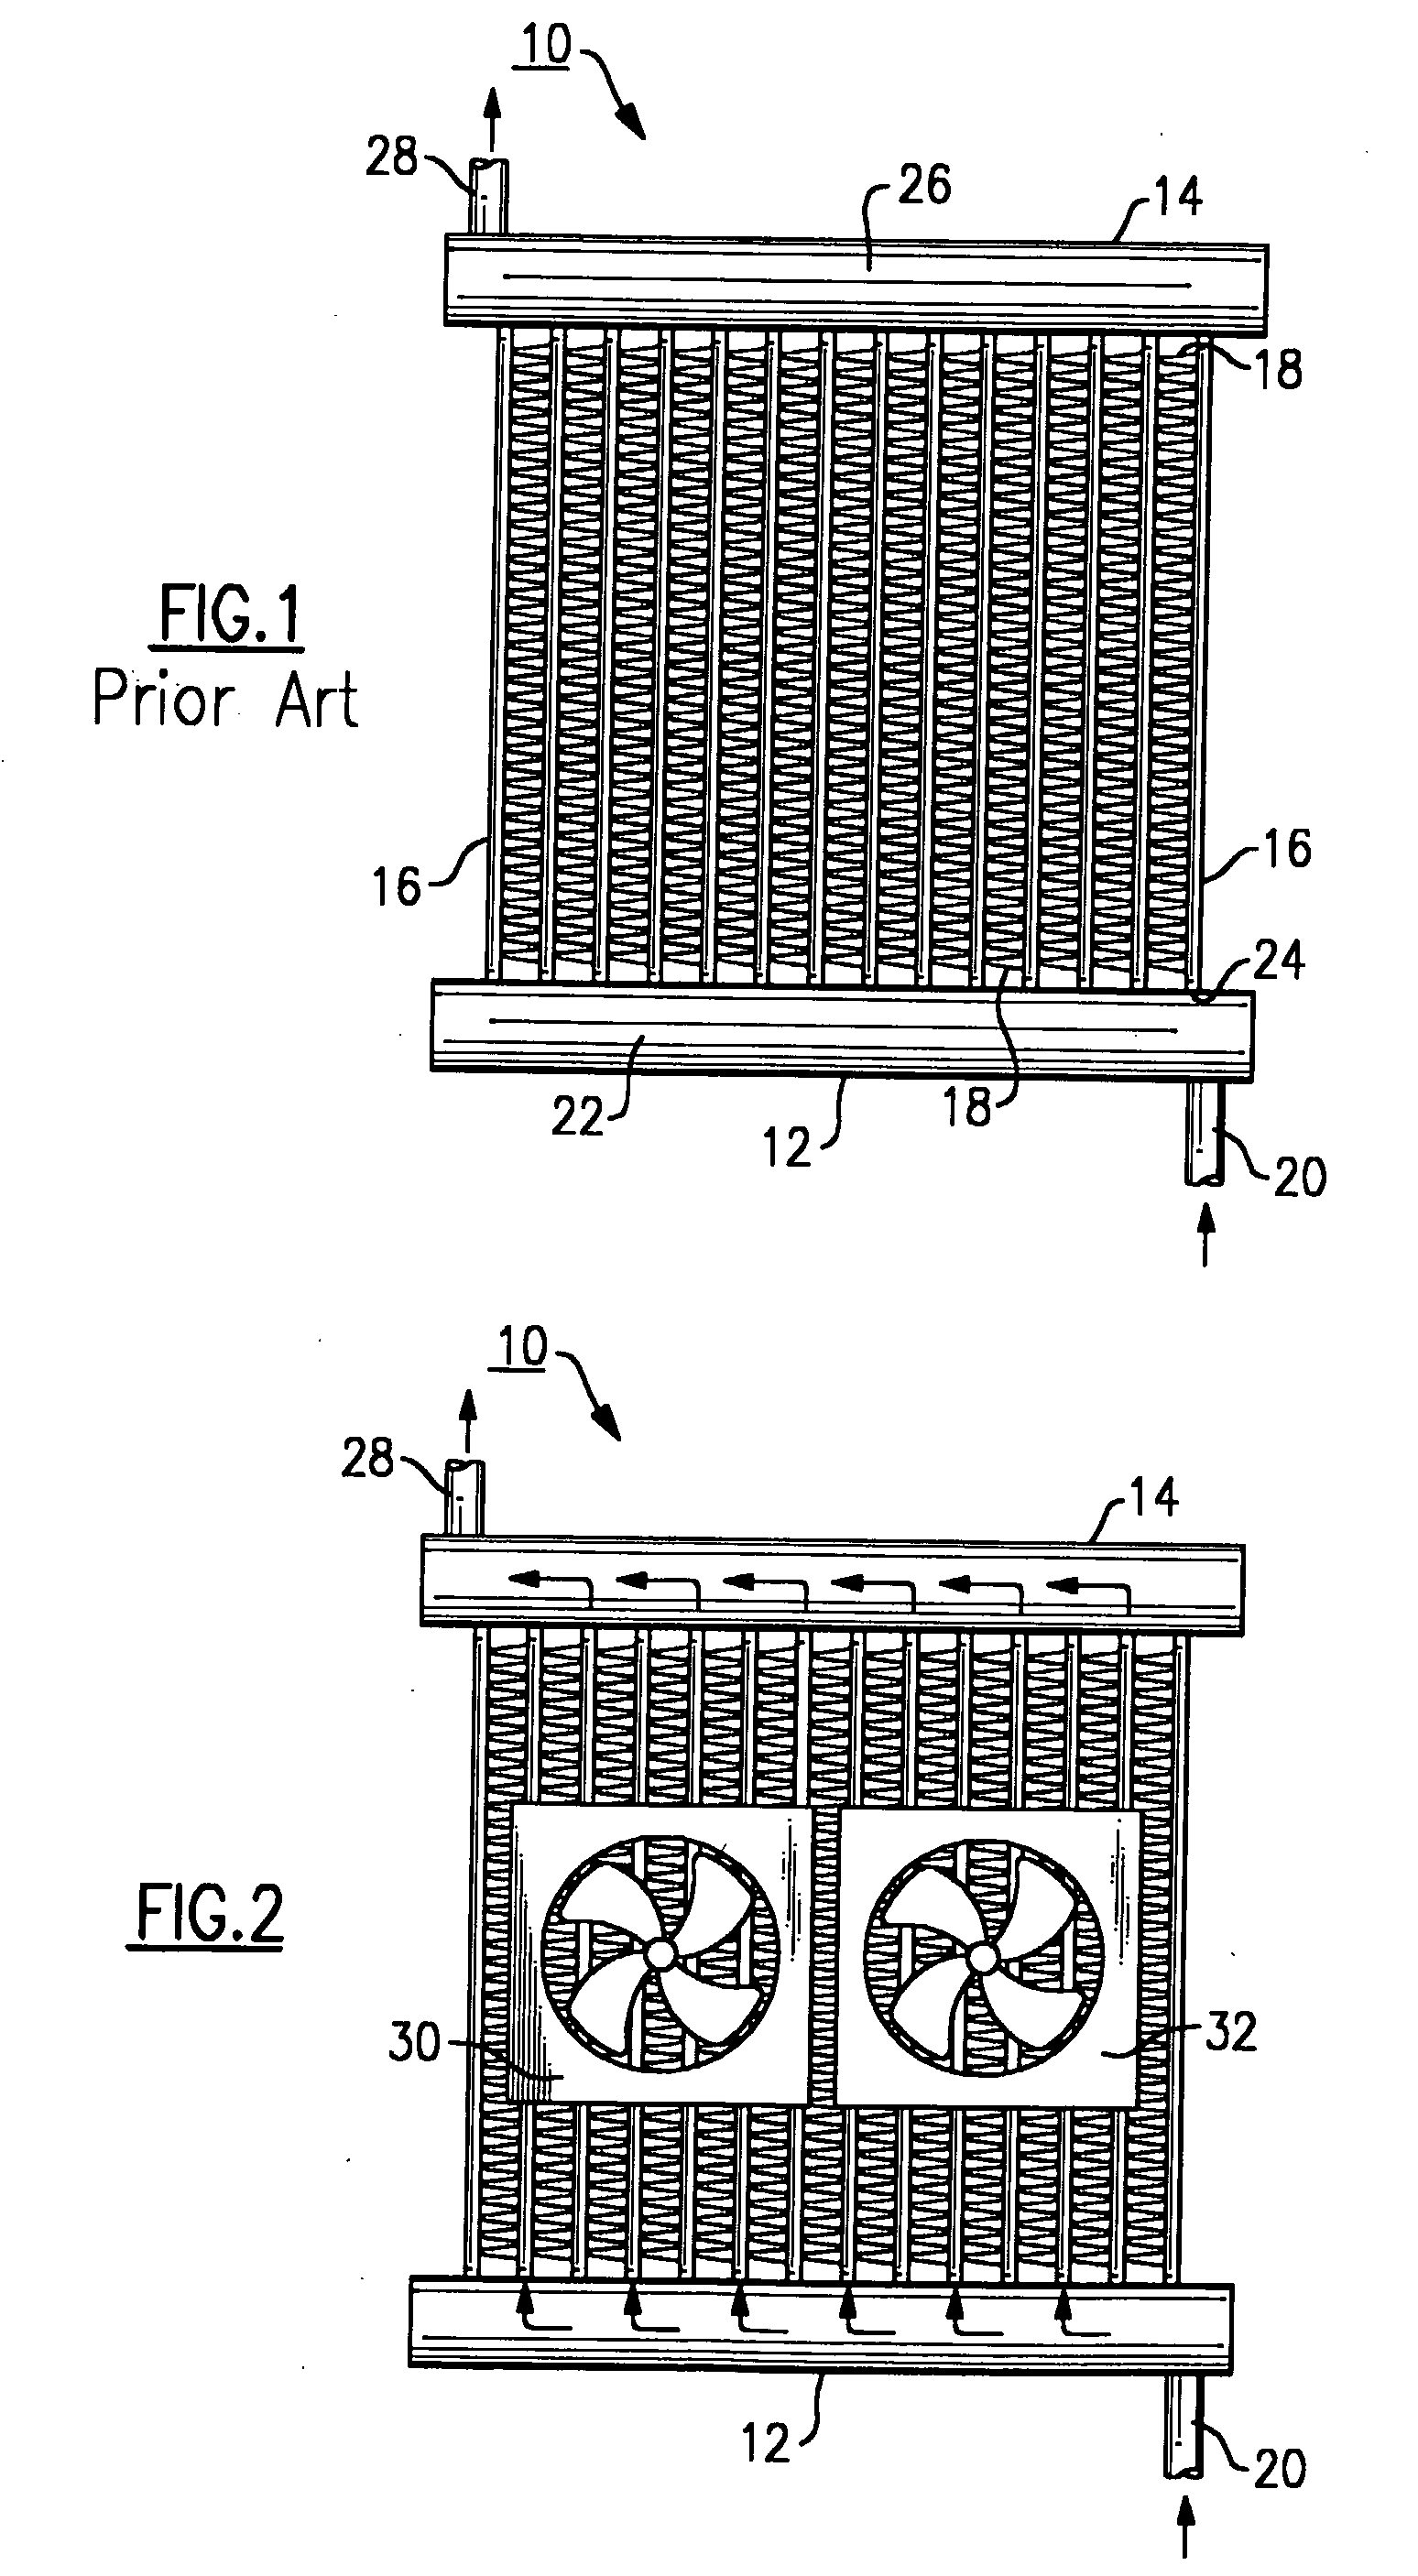 Pulse Width Modulation Or Variable Speed Control Of Fans In Refrigerant Systems